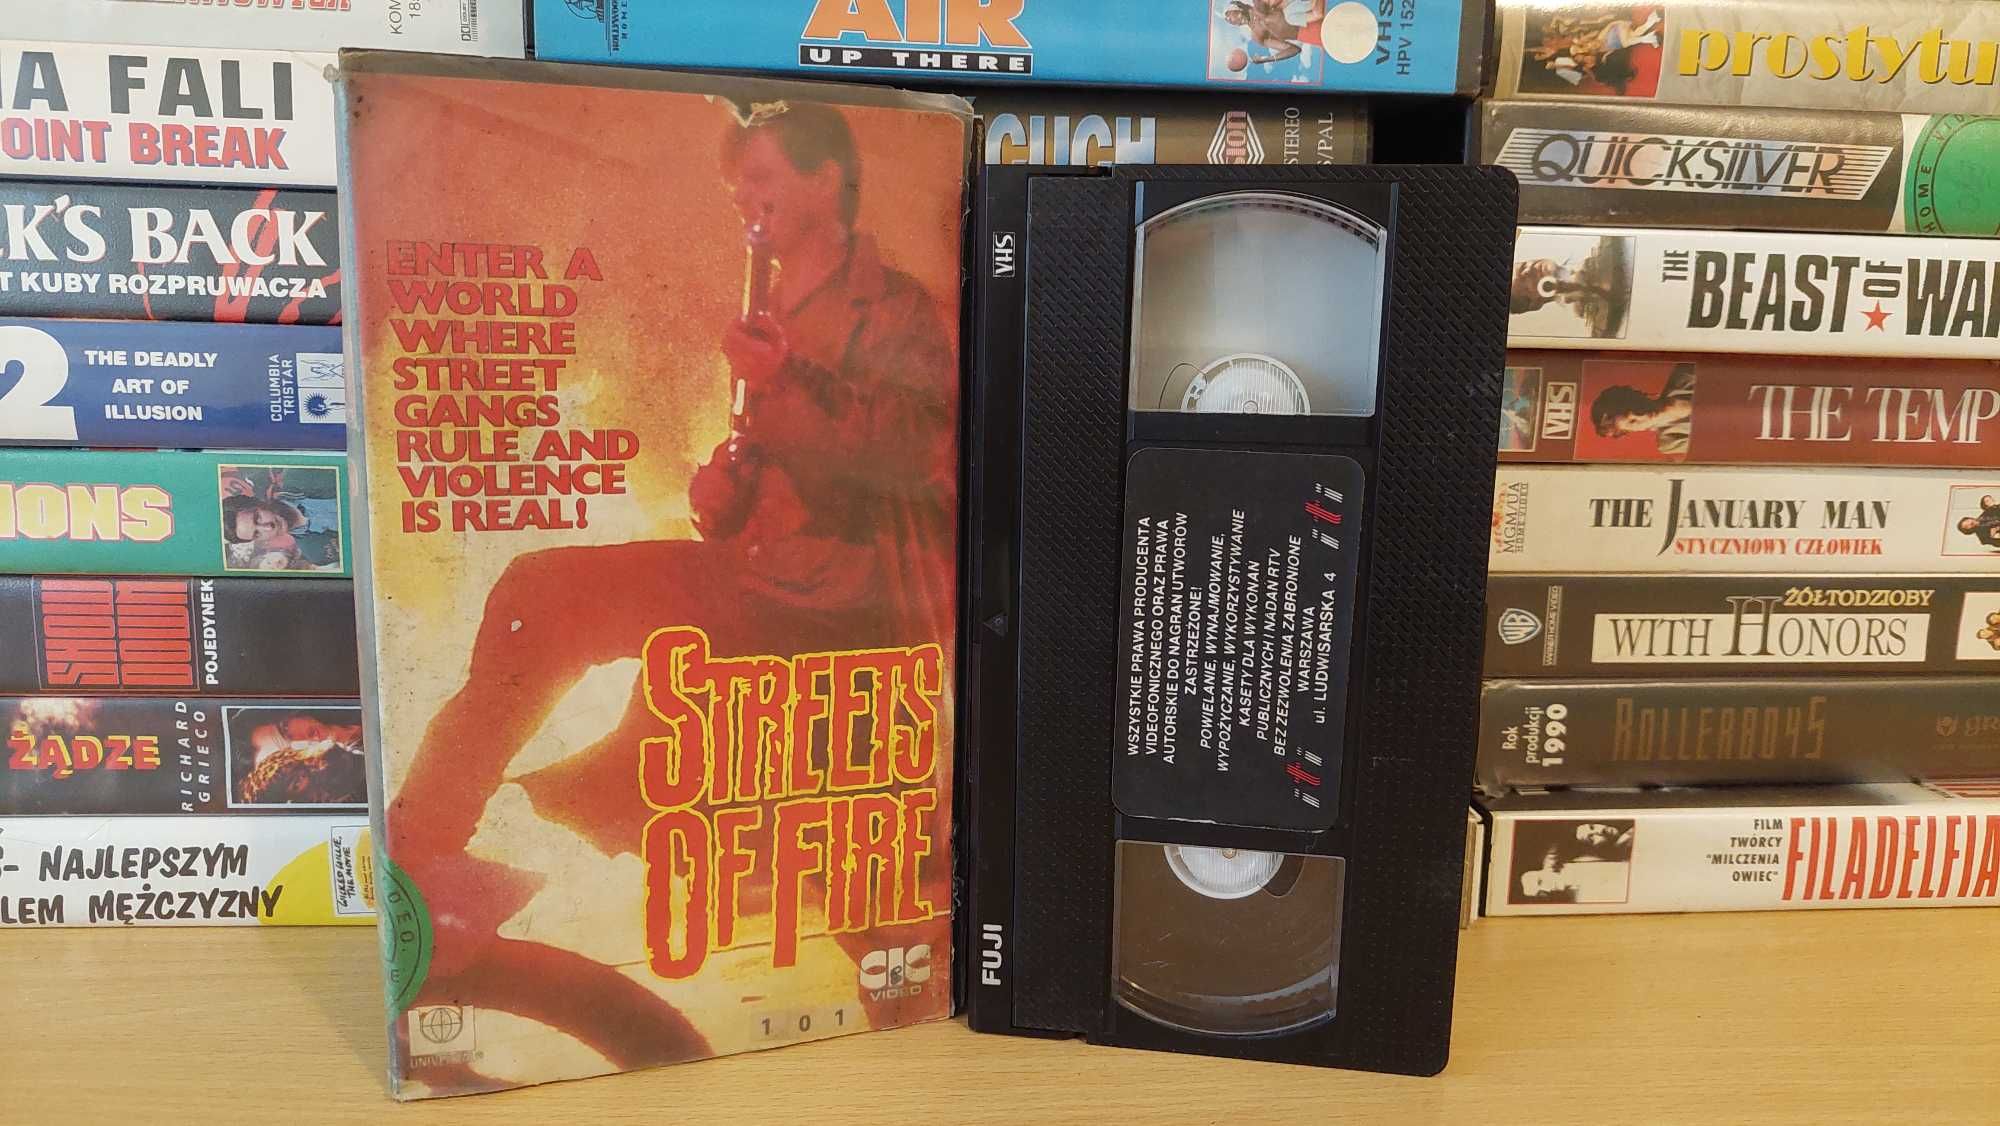 Ulice w Ogniu - (Streets of Fire) - VHS